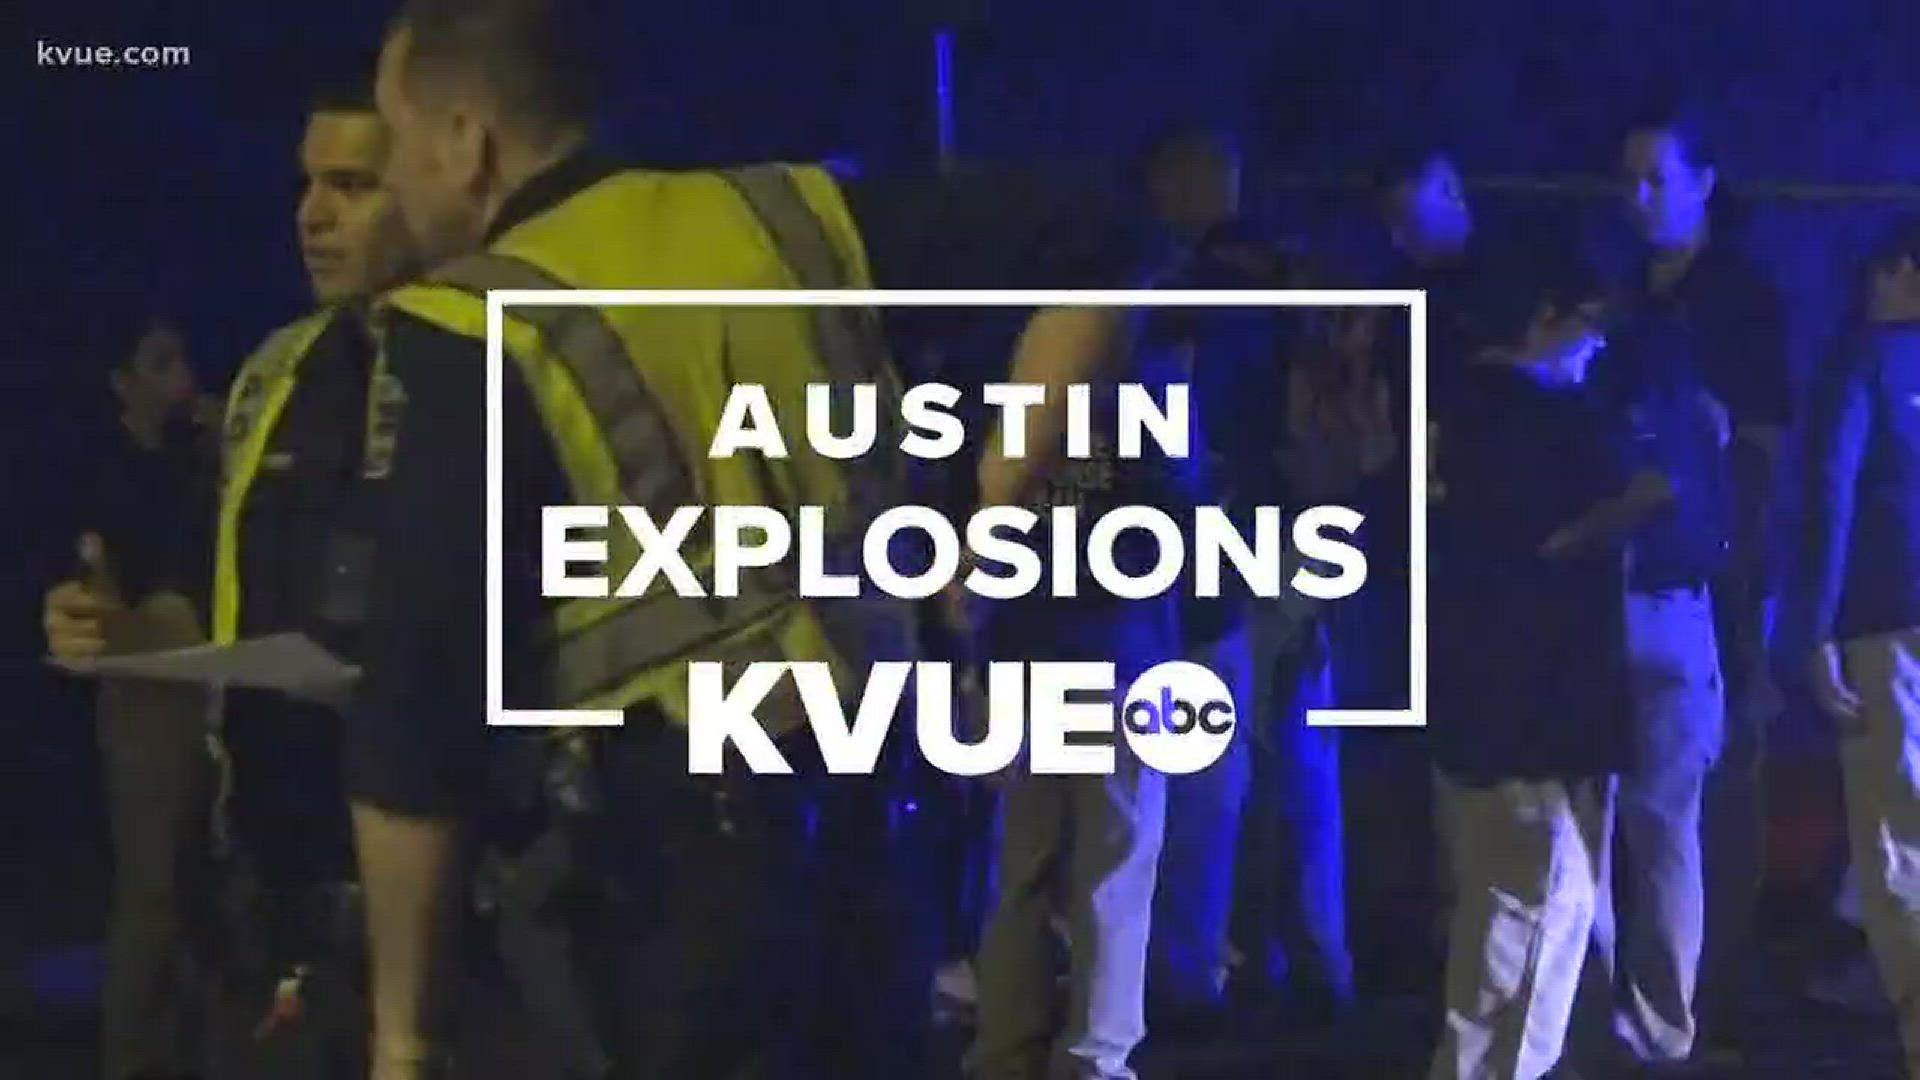 Austin's police chief Brian Manley said "we are clearly dealing with a serial bomber" hours after officials responded to an explosion in Southwest Austin Sunday night.